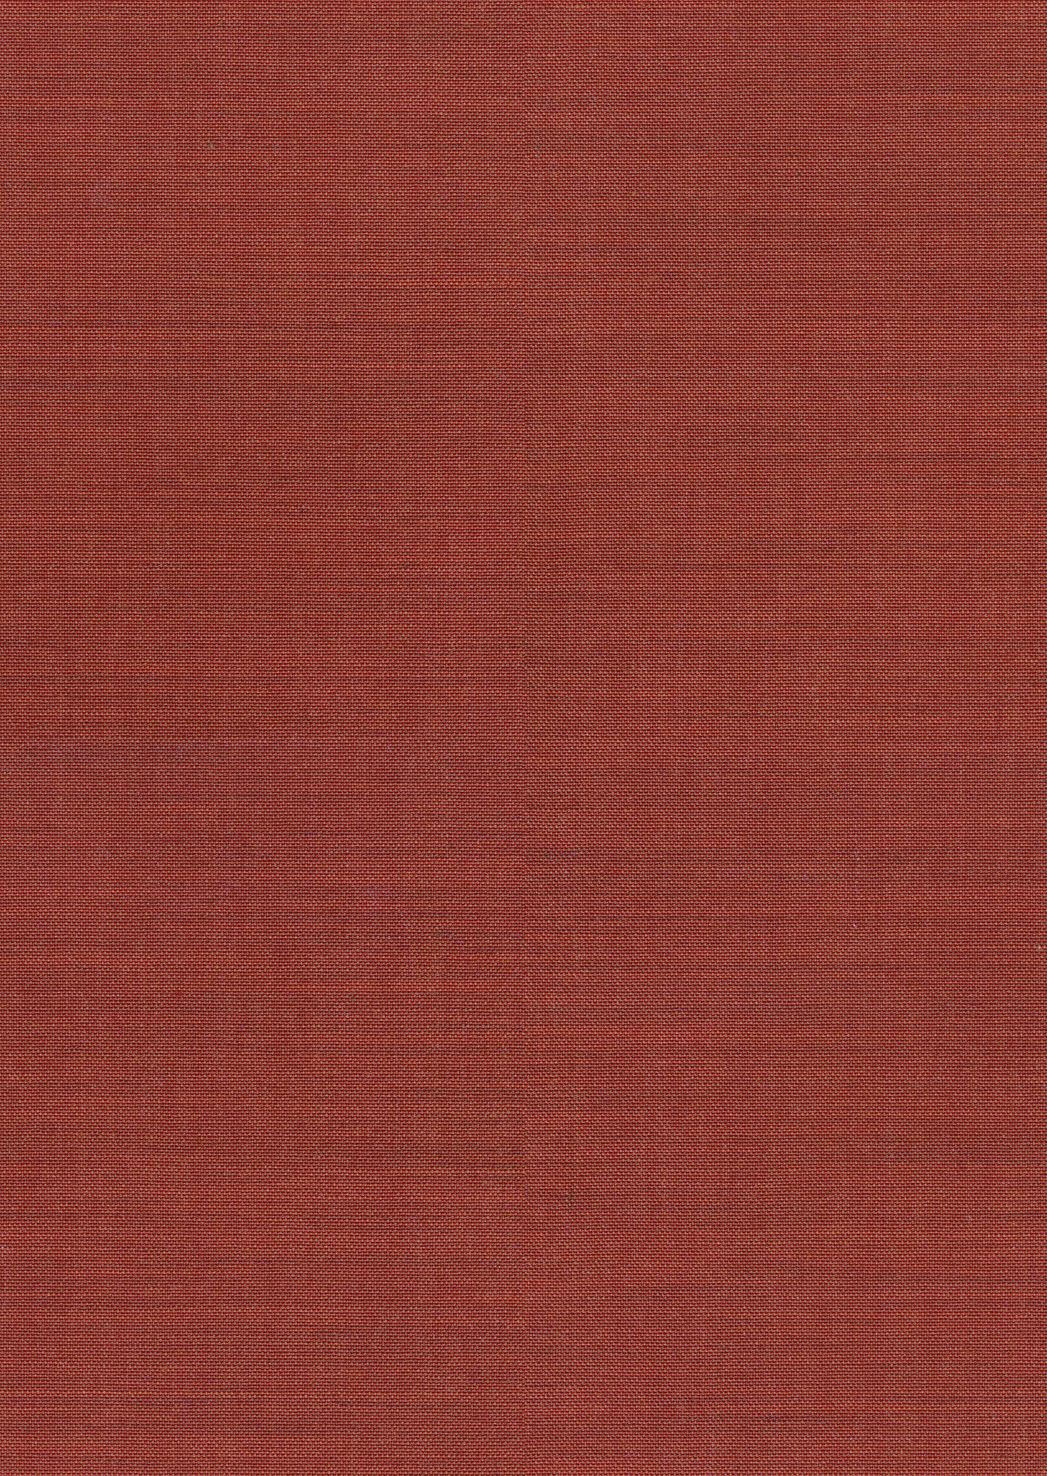 Fabric sample Remix 3 632 red